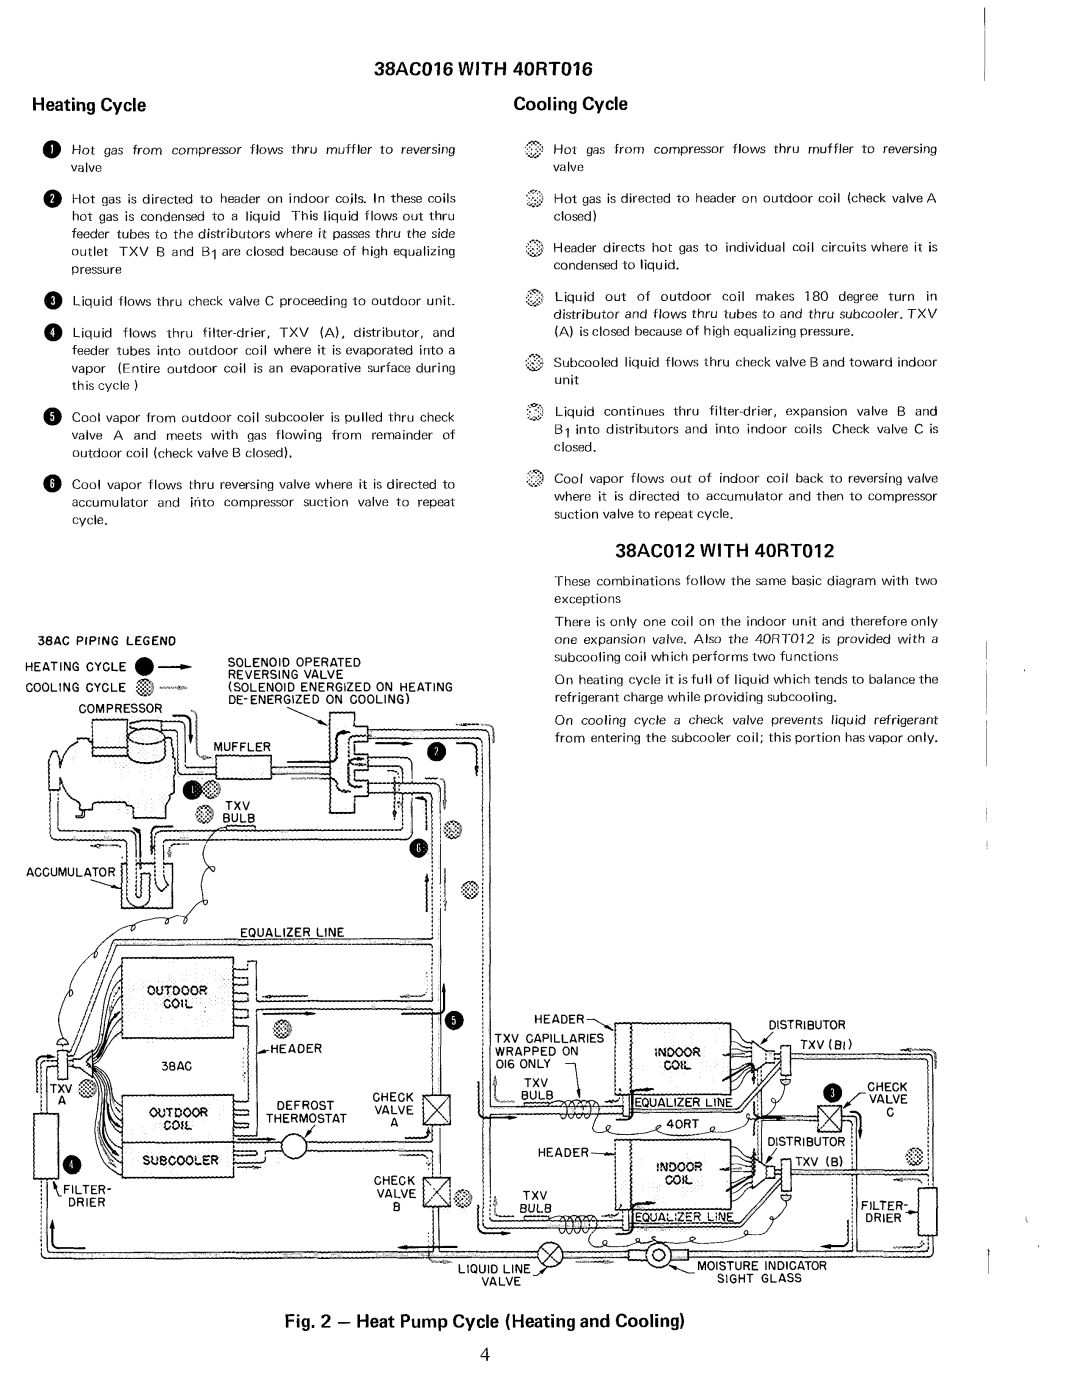 Carrier 38AC manual 